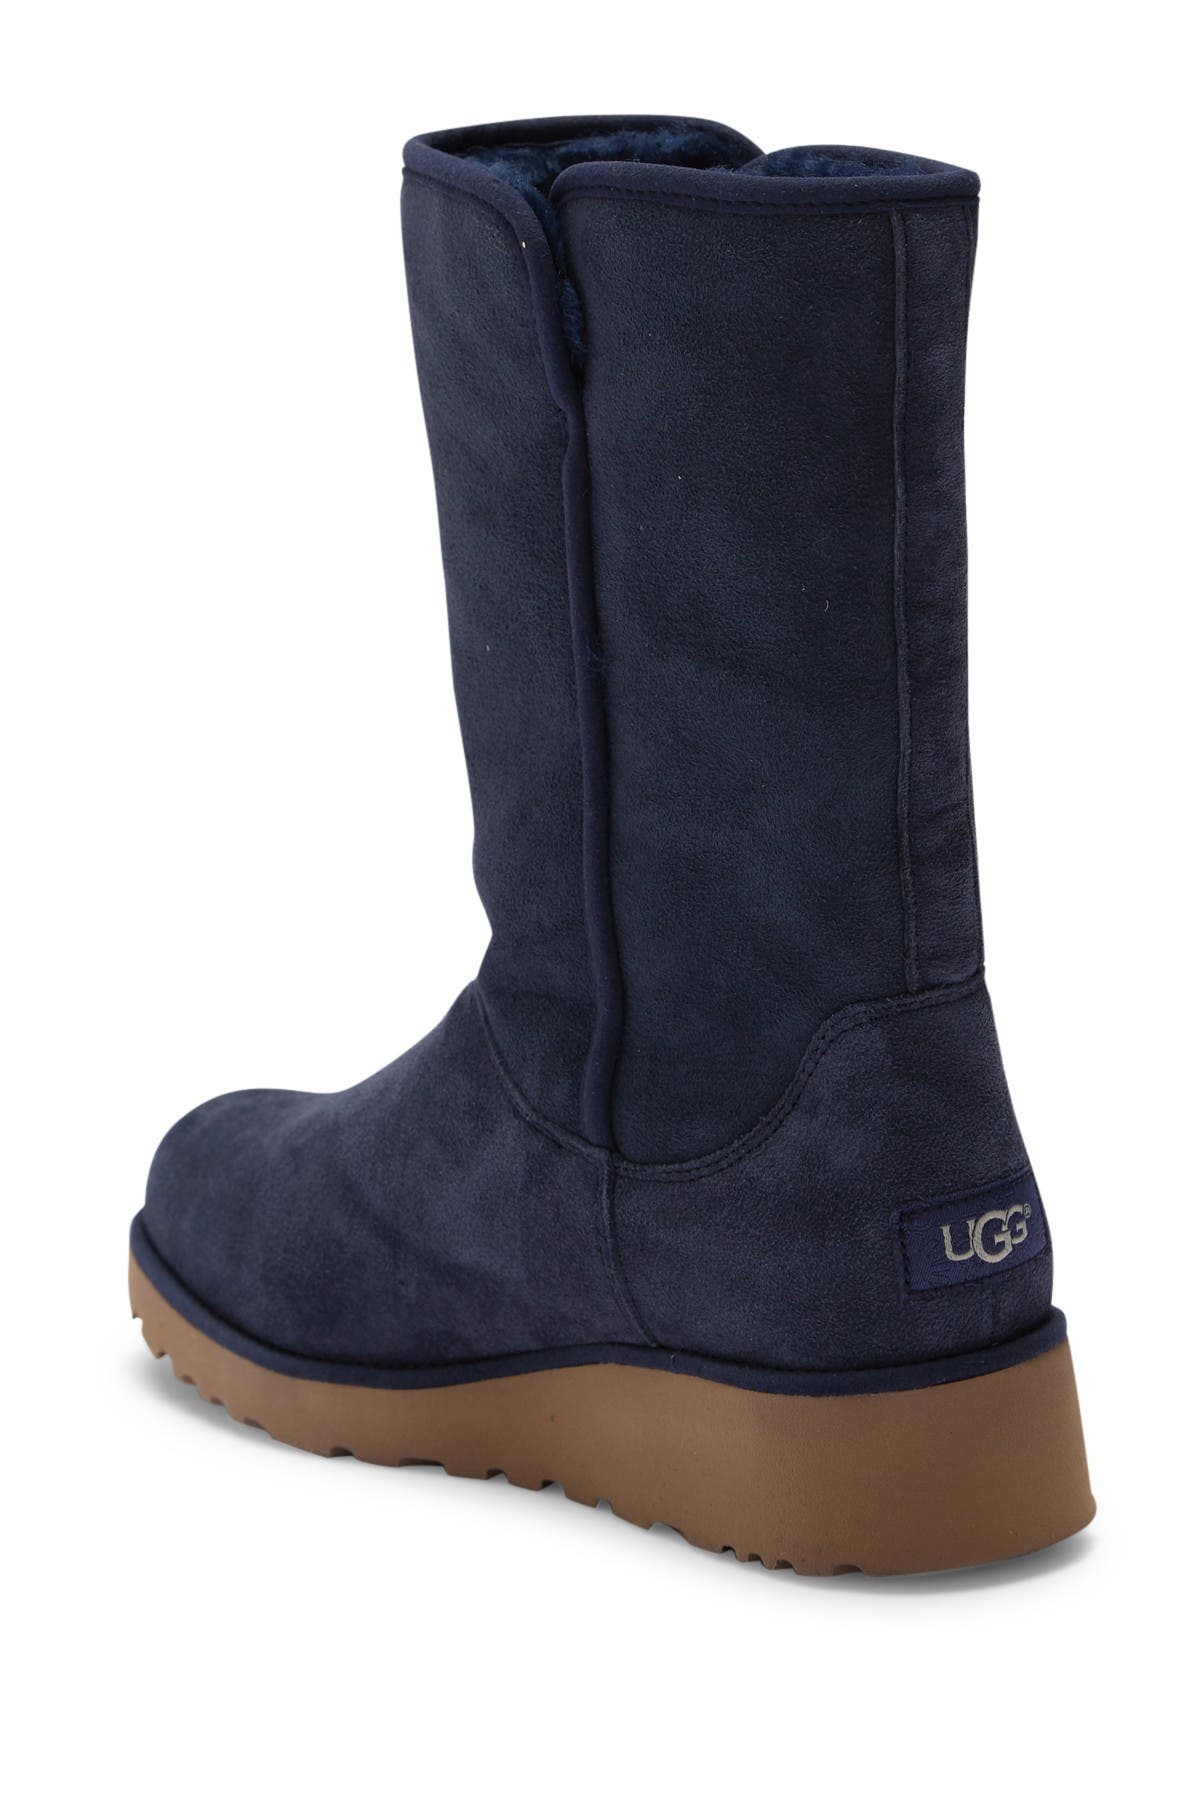 ugg amie boot size 8